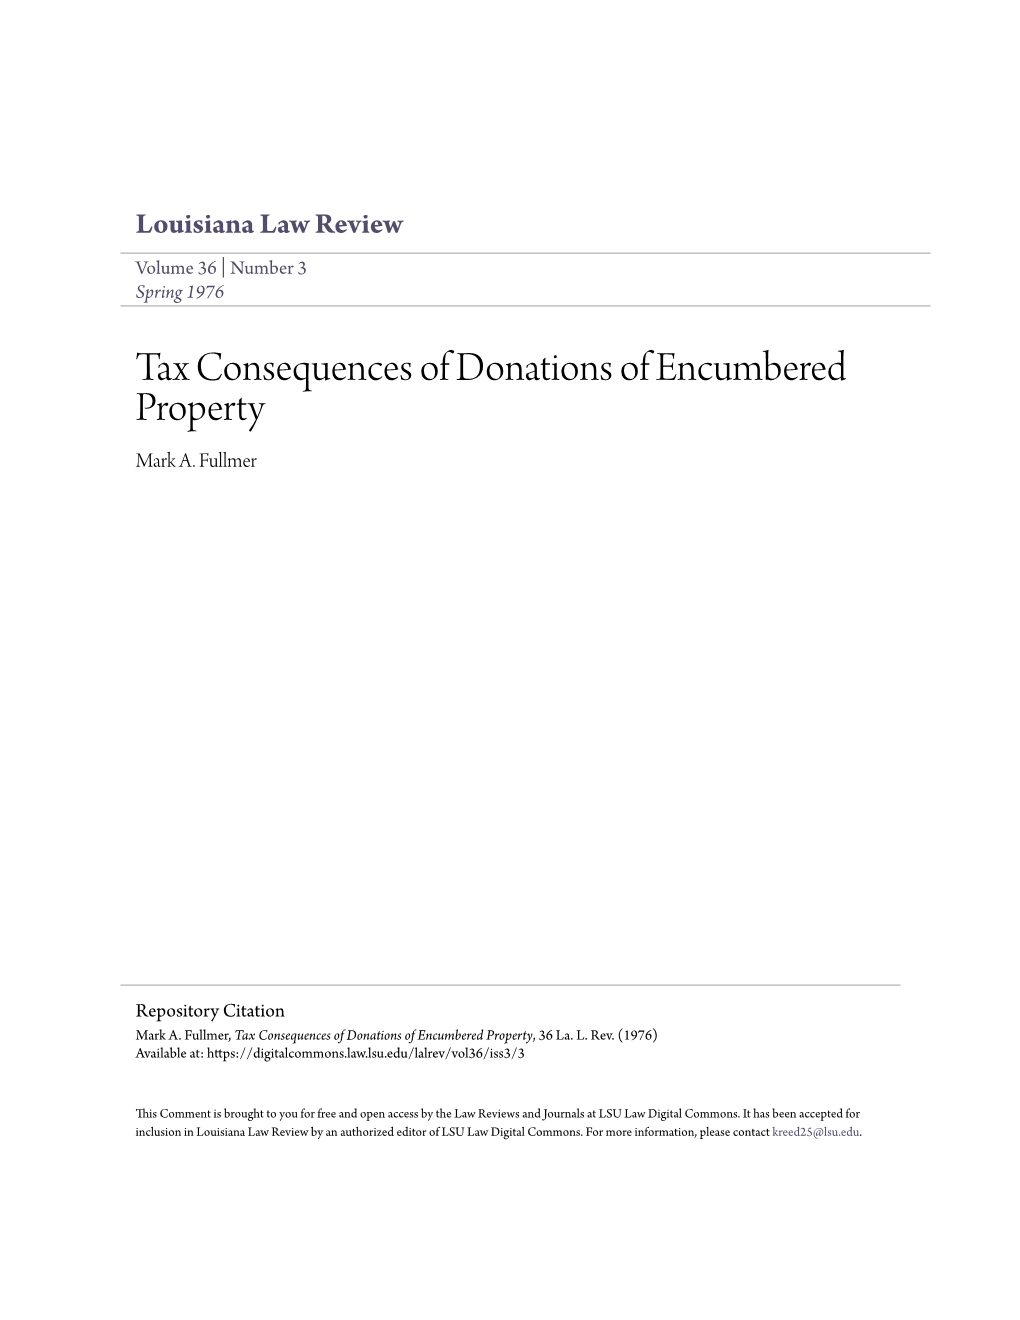 Tax Consequences of Donations of Encumbered Property Mark A